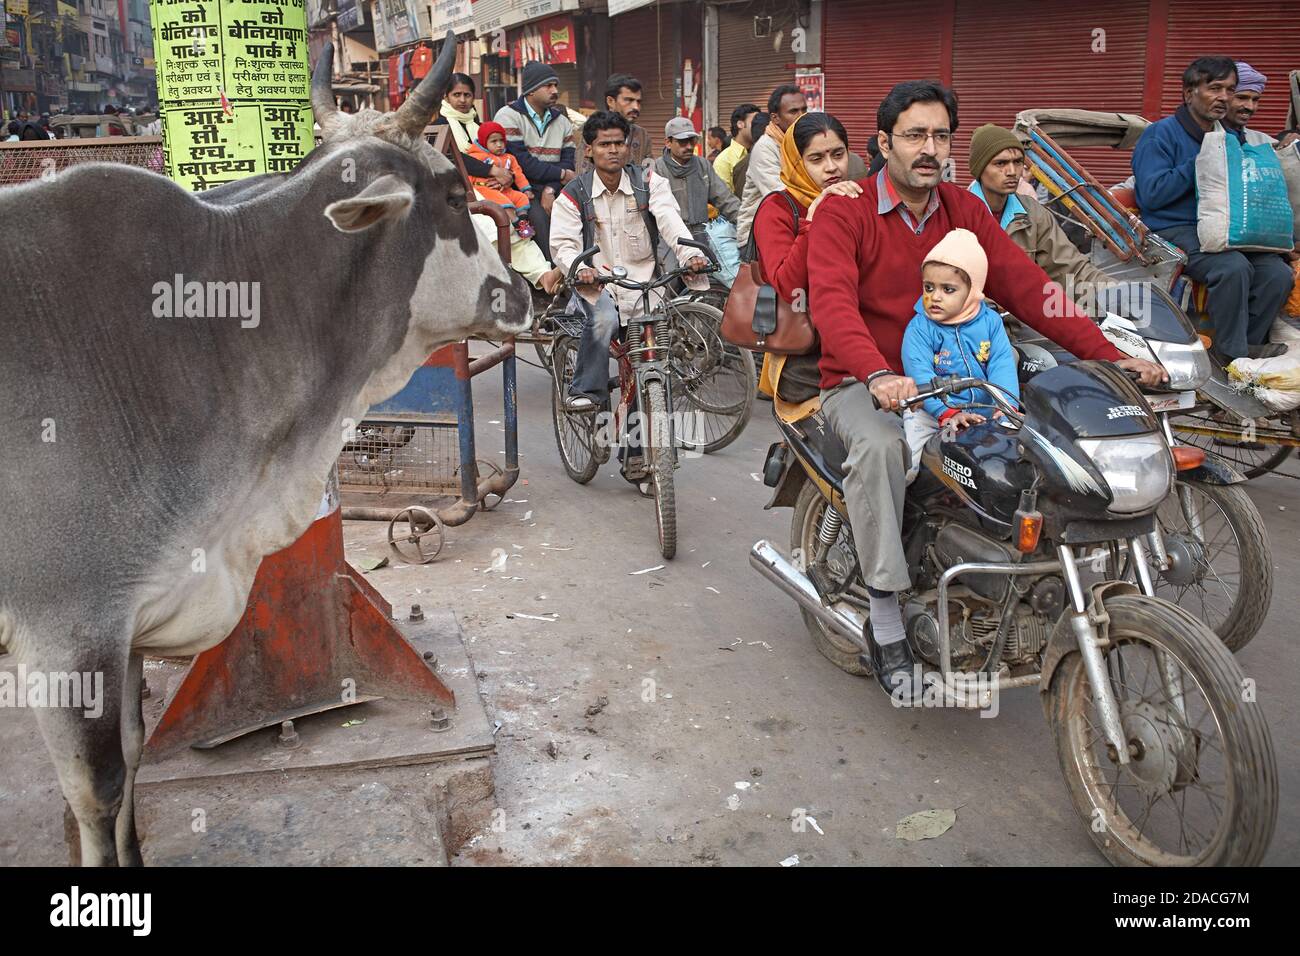 Varanasi, India, January 2009. A family on a motorbike passes in front of a cow on a busy street. Stock Photo